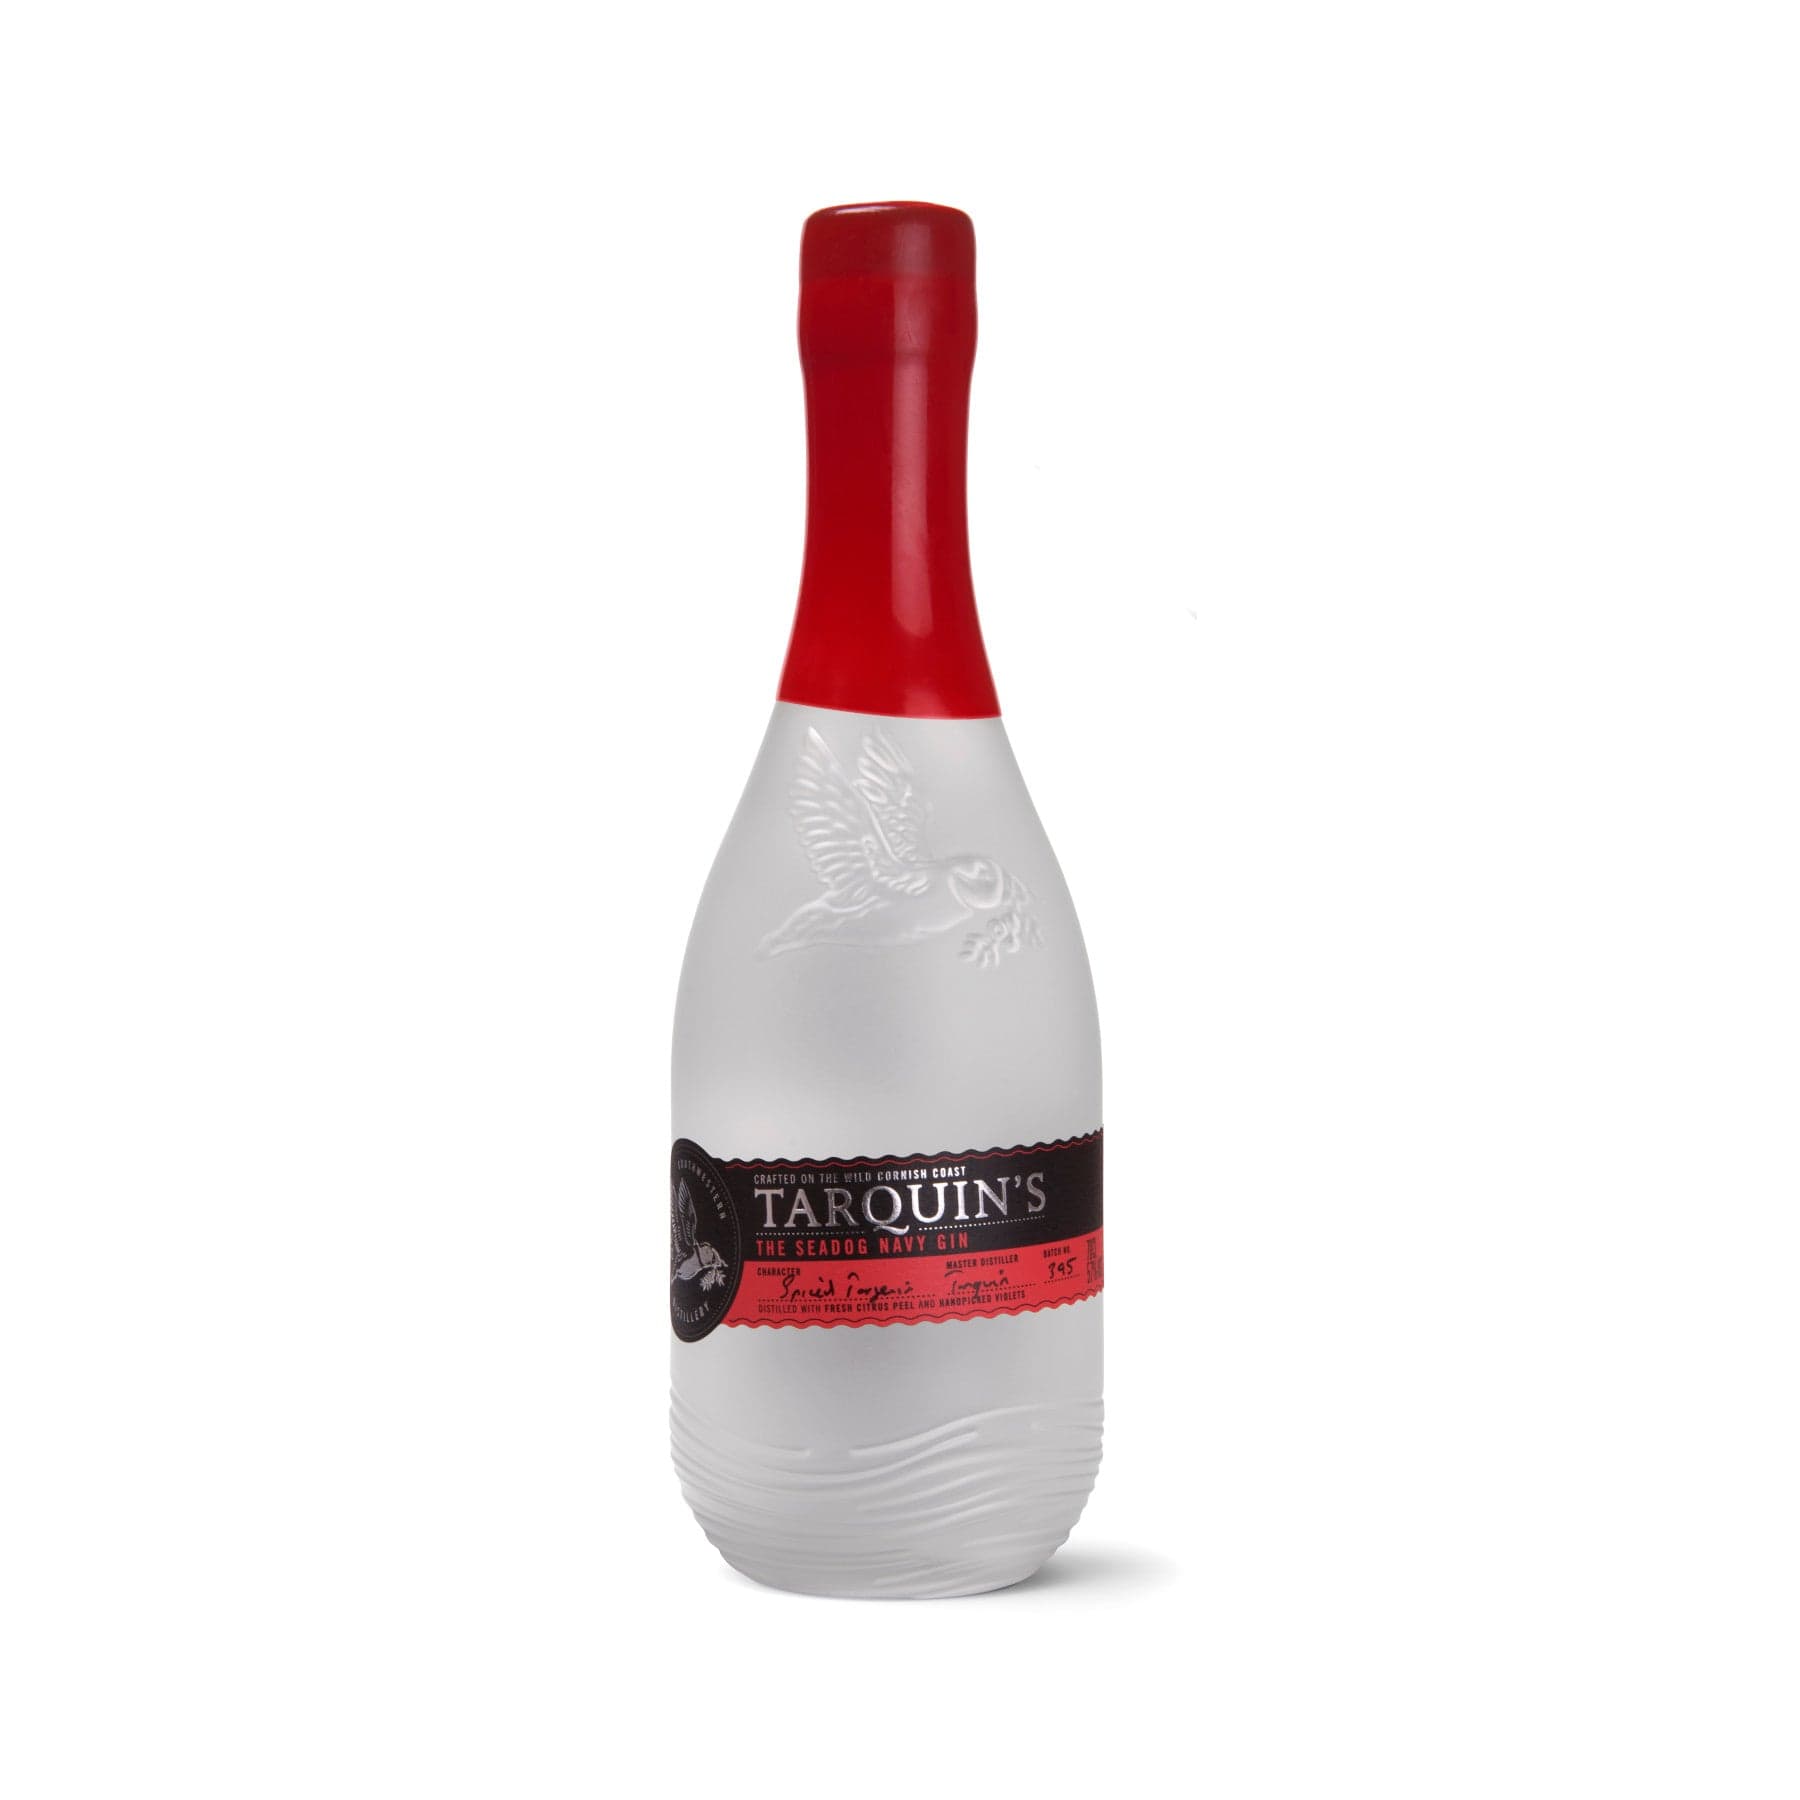 Frosted glass gin bottle with red wax seal, Tarquin's Cornish gin, white background